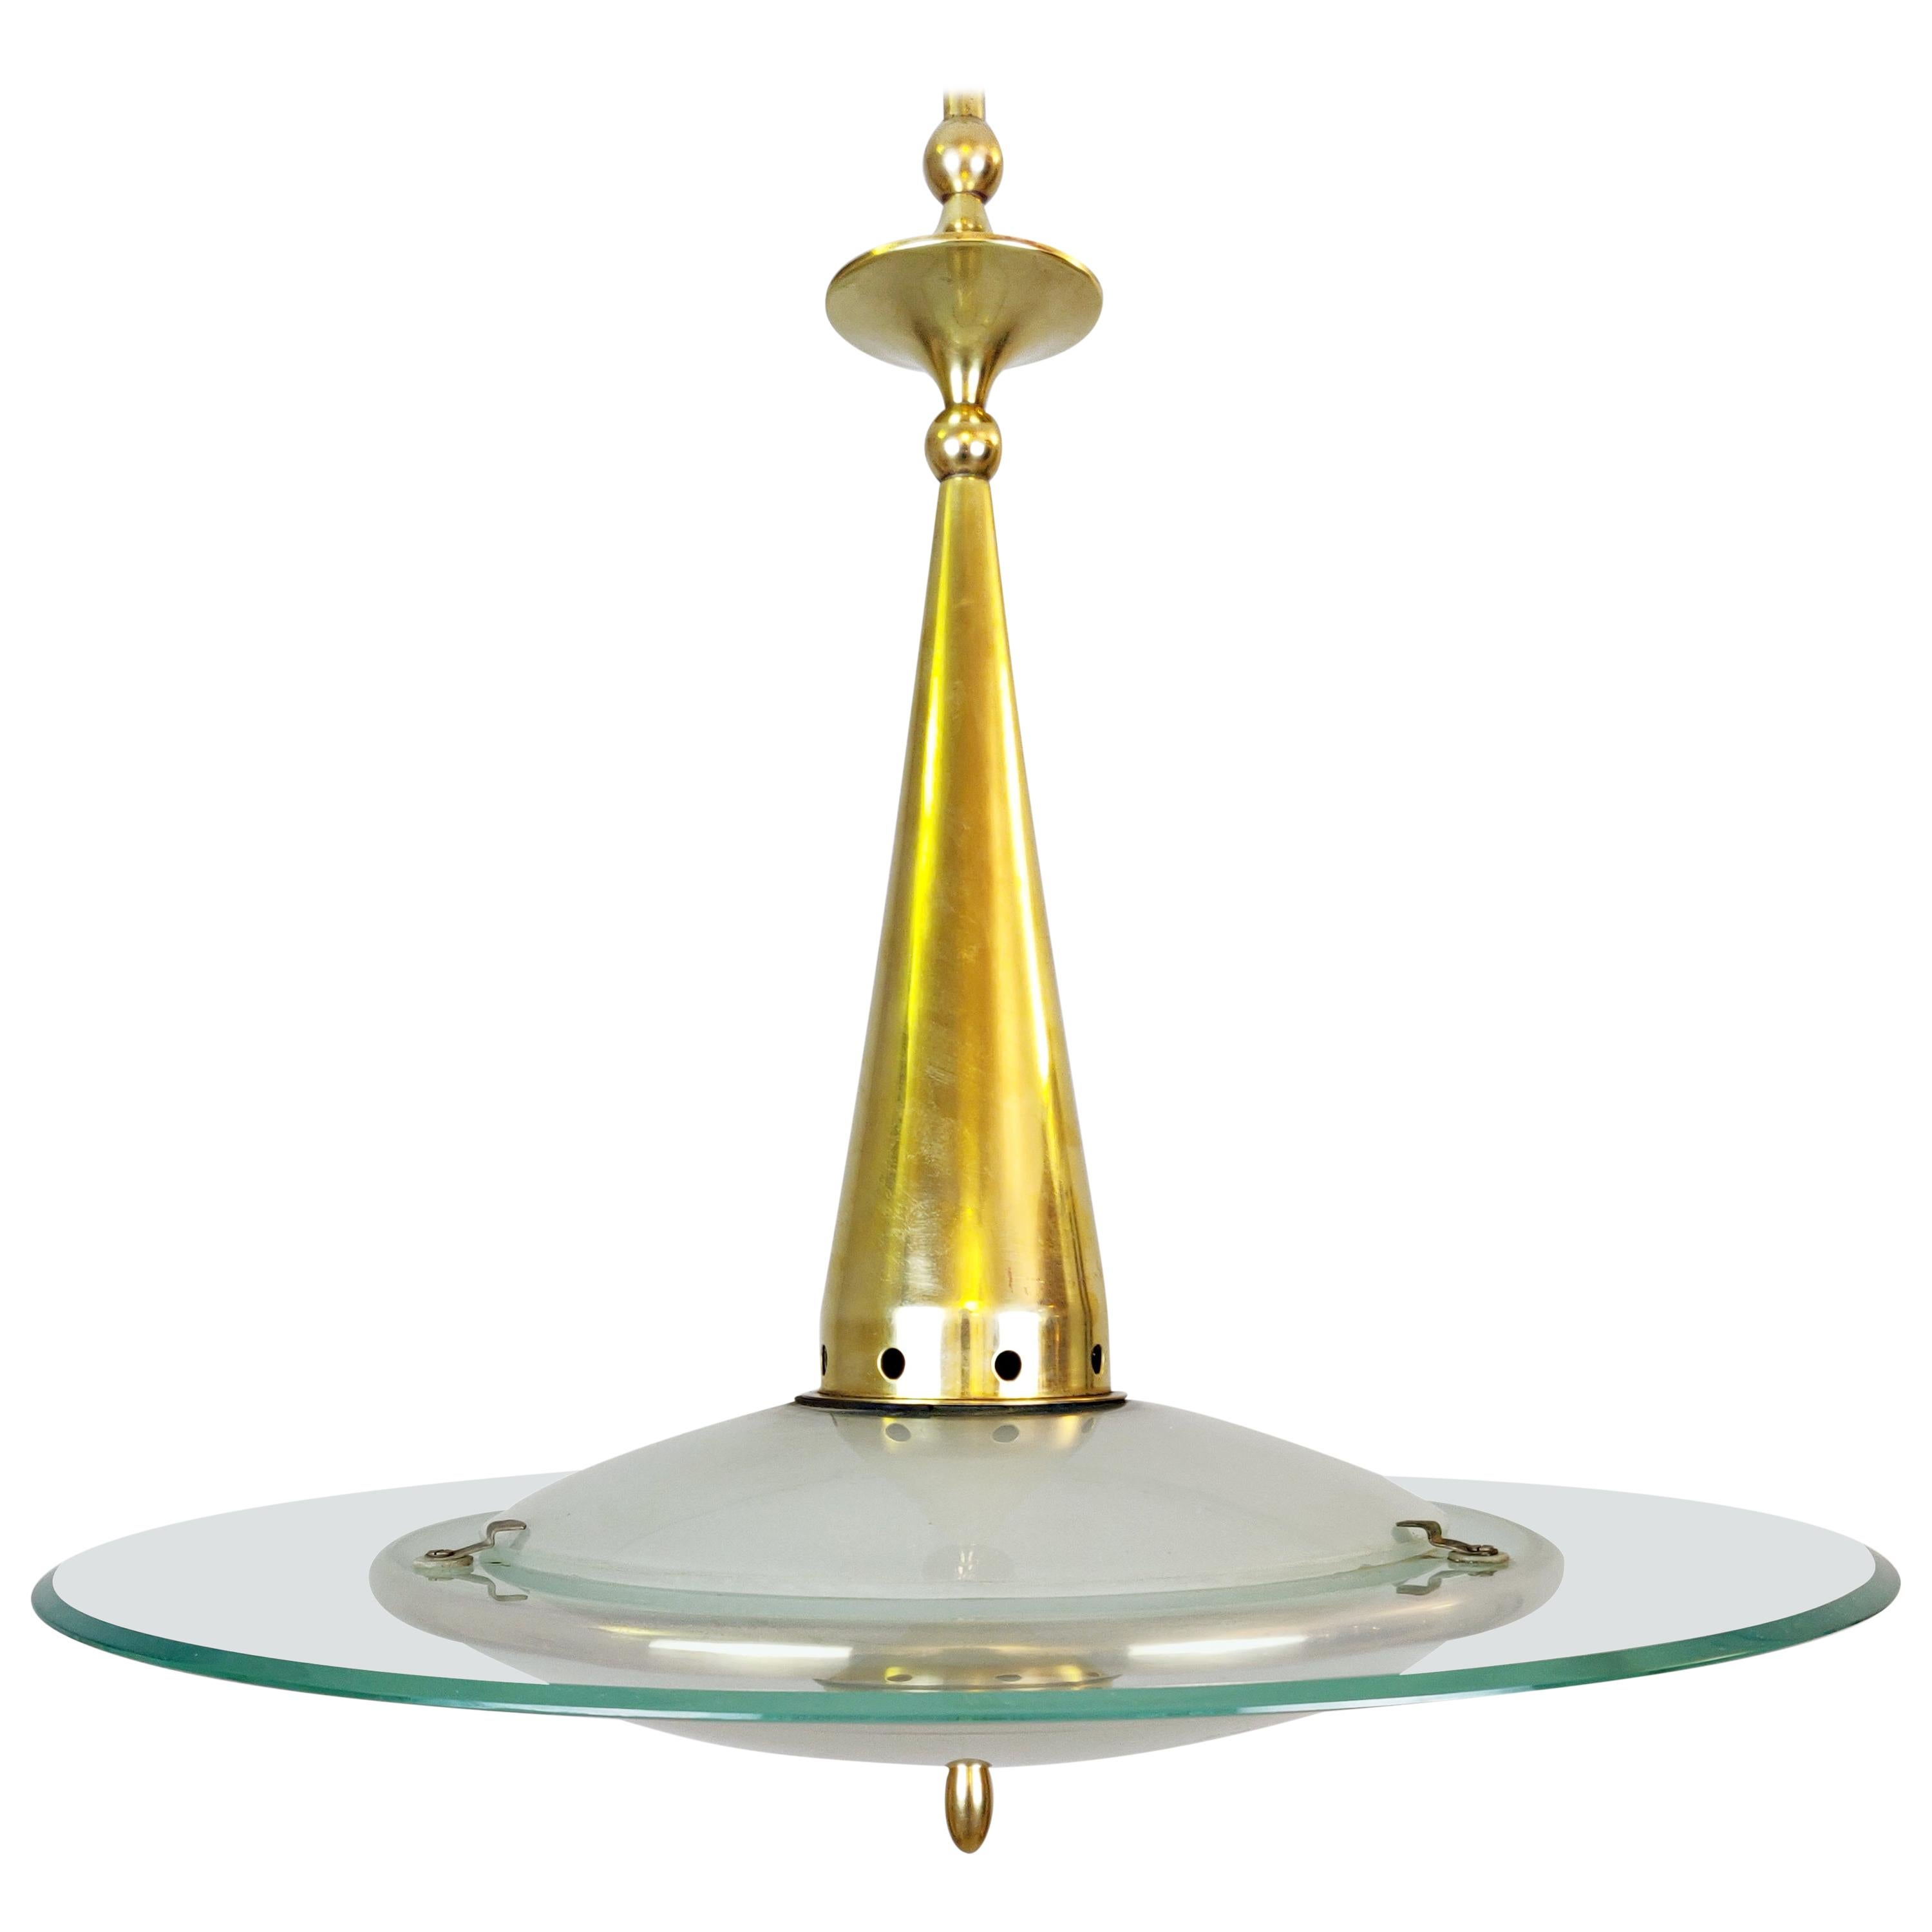 Midcentury Pendant Light in Glass and Brass